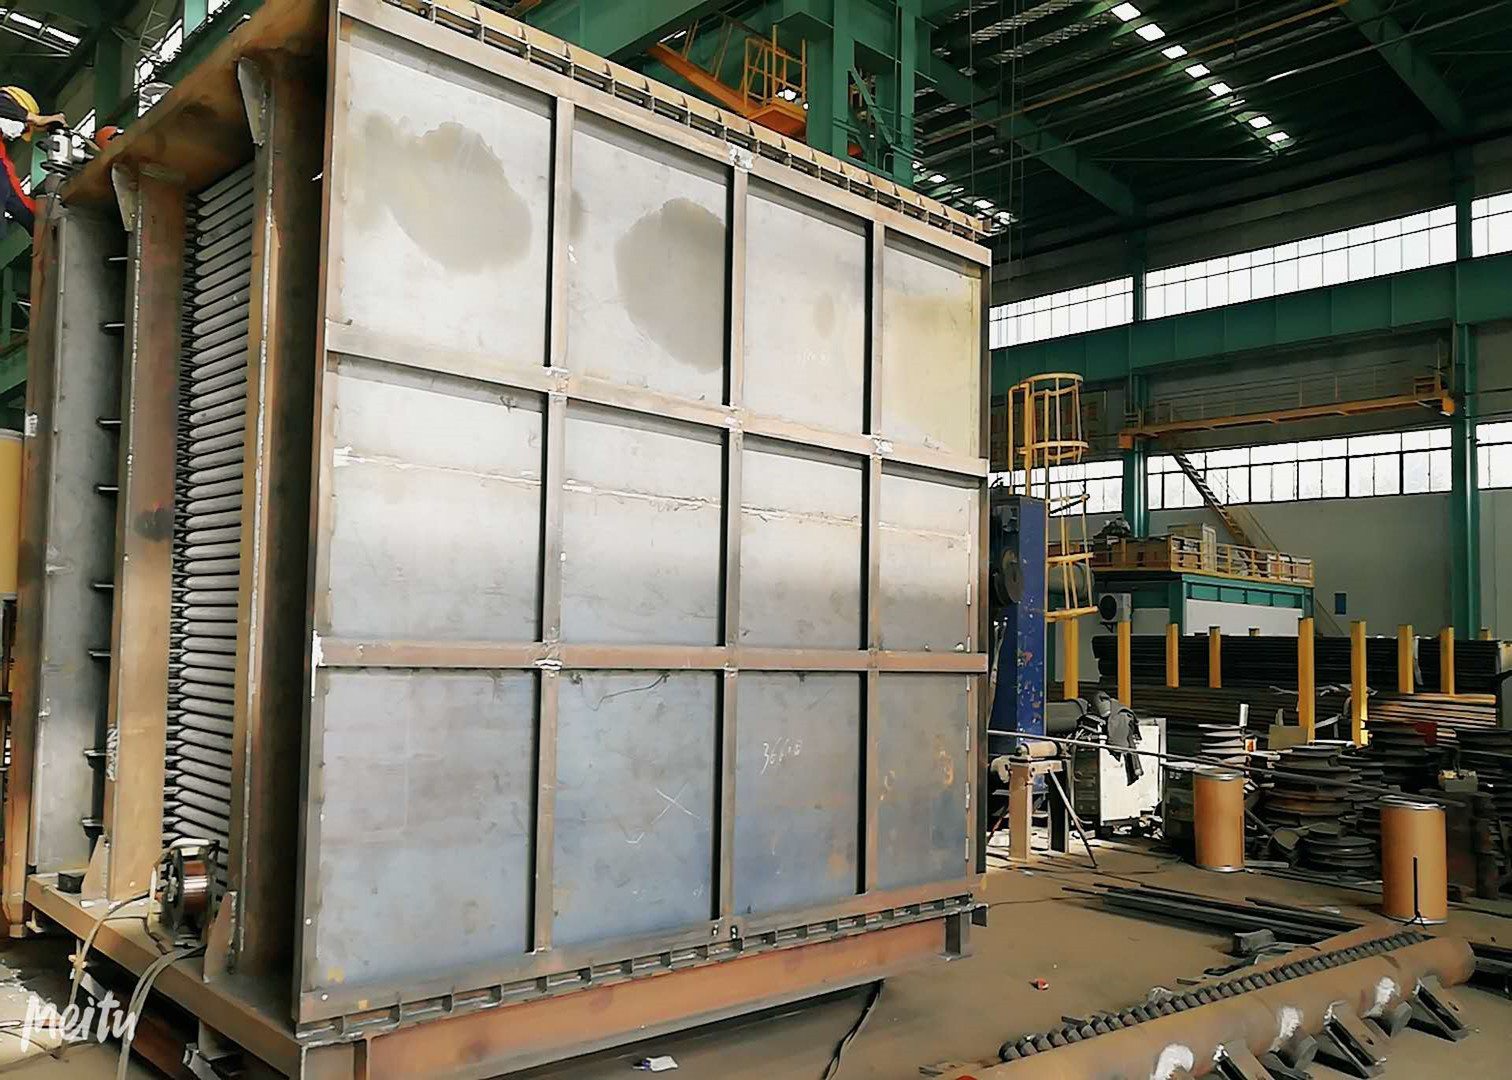 Naturally Circulated Painted High Efficient Boiler Air Preheater for Power Station